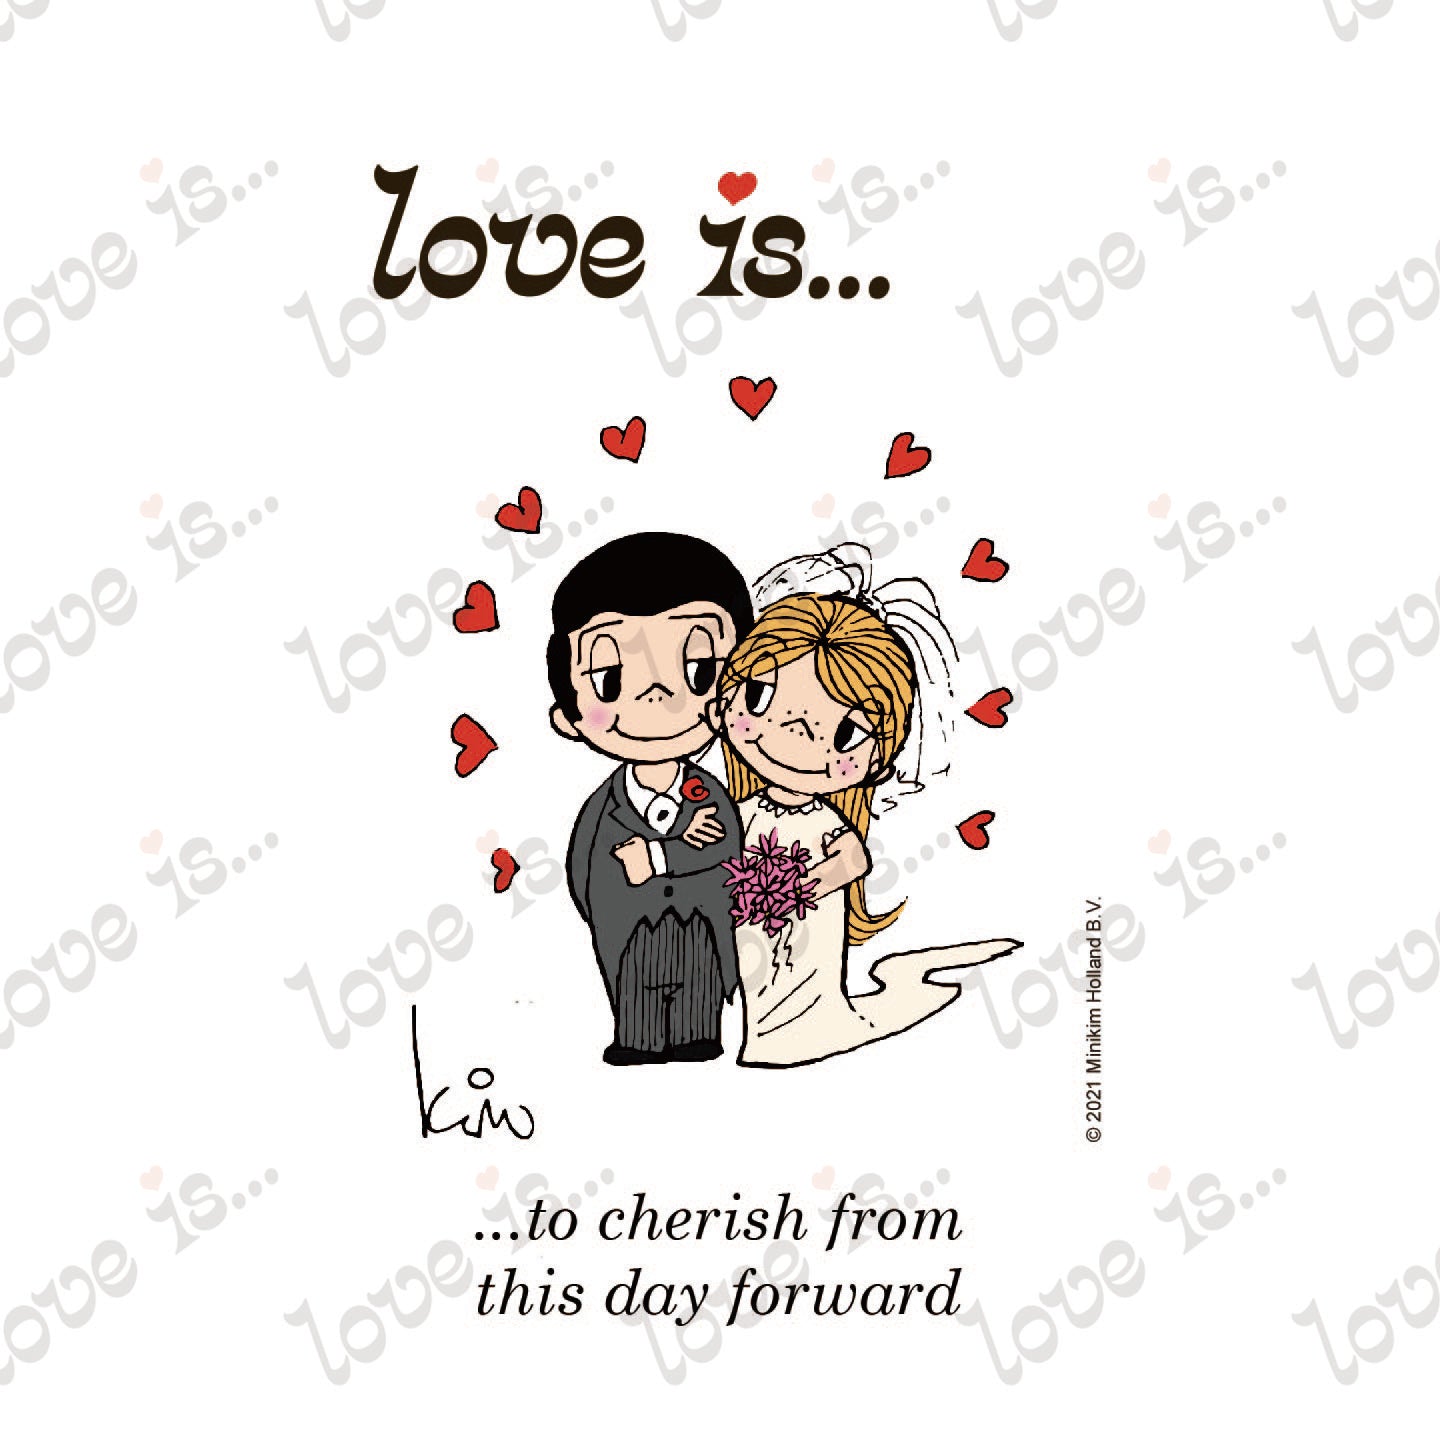 LOVE IS... TO CHERISH FROM THIS DAY FORWARD WEDDING ART PRINT